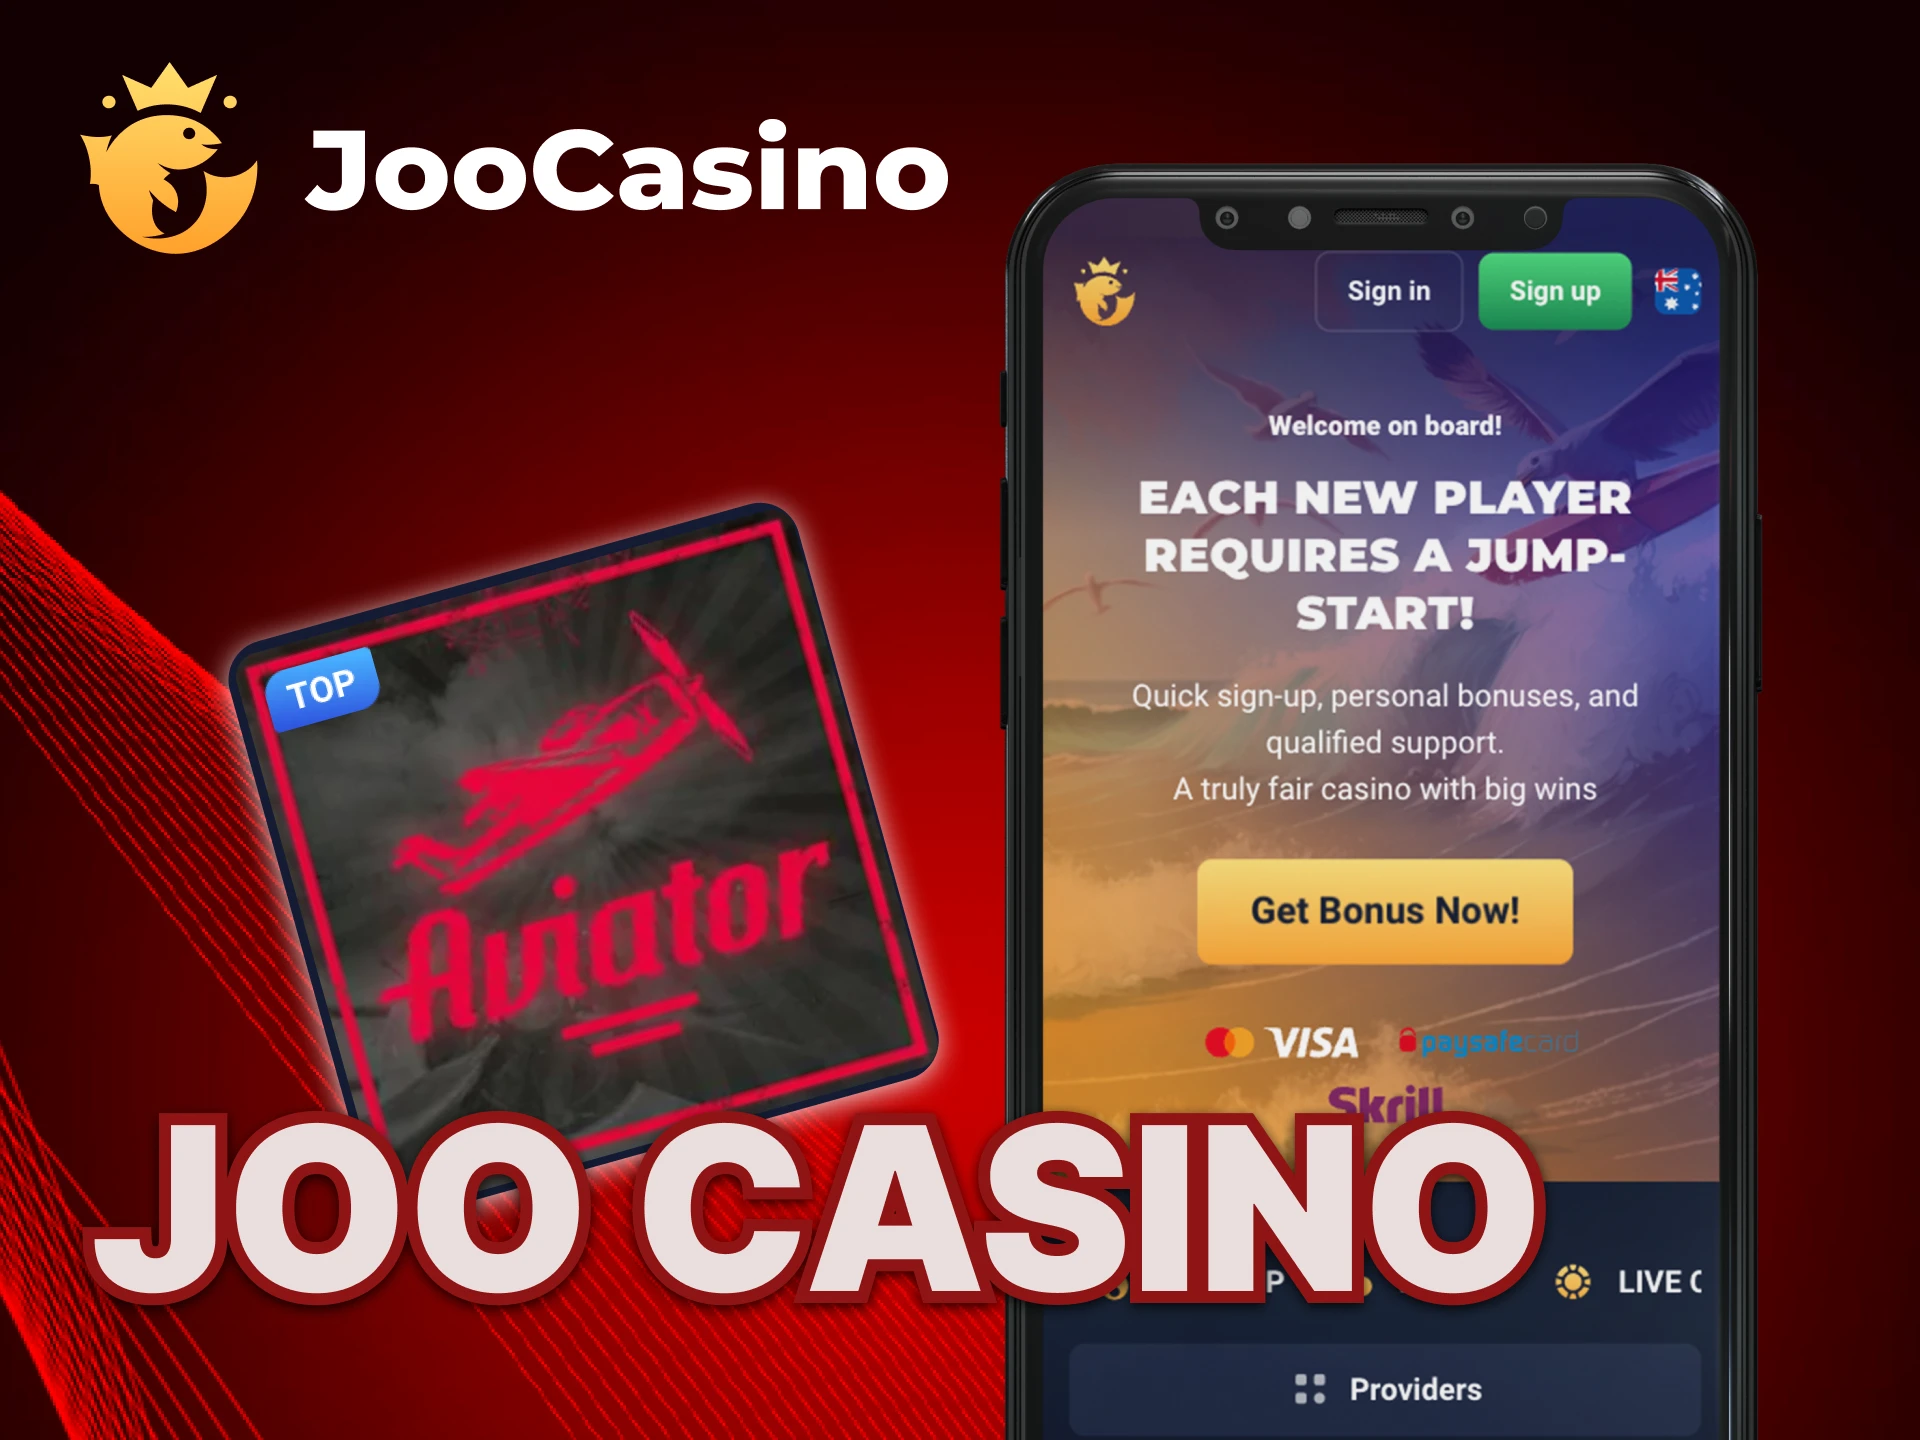 What options are there in the Joo Casino mobile app.